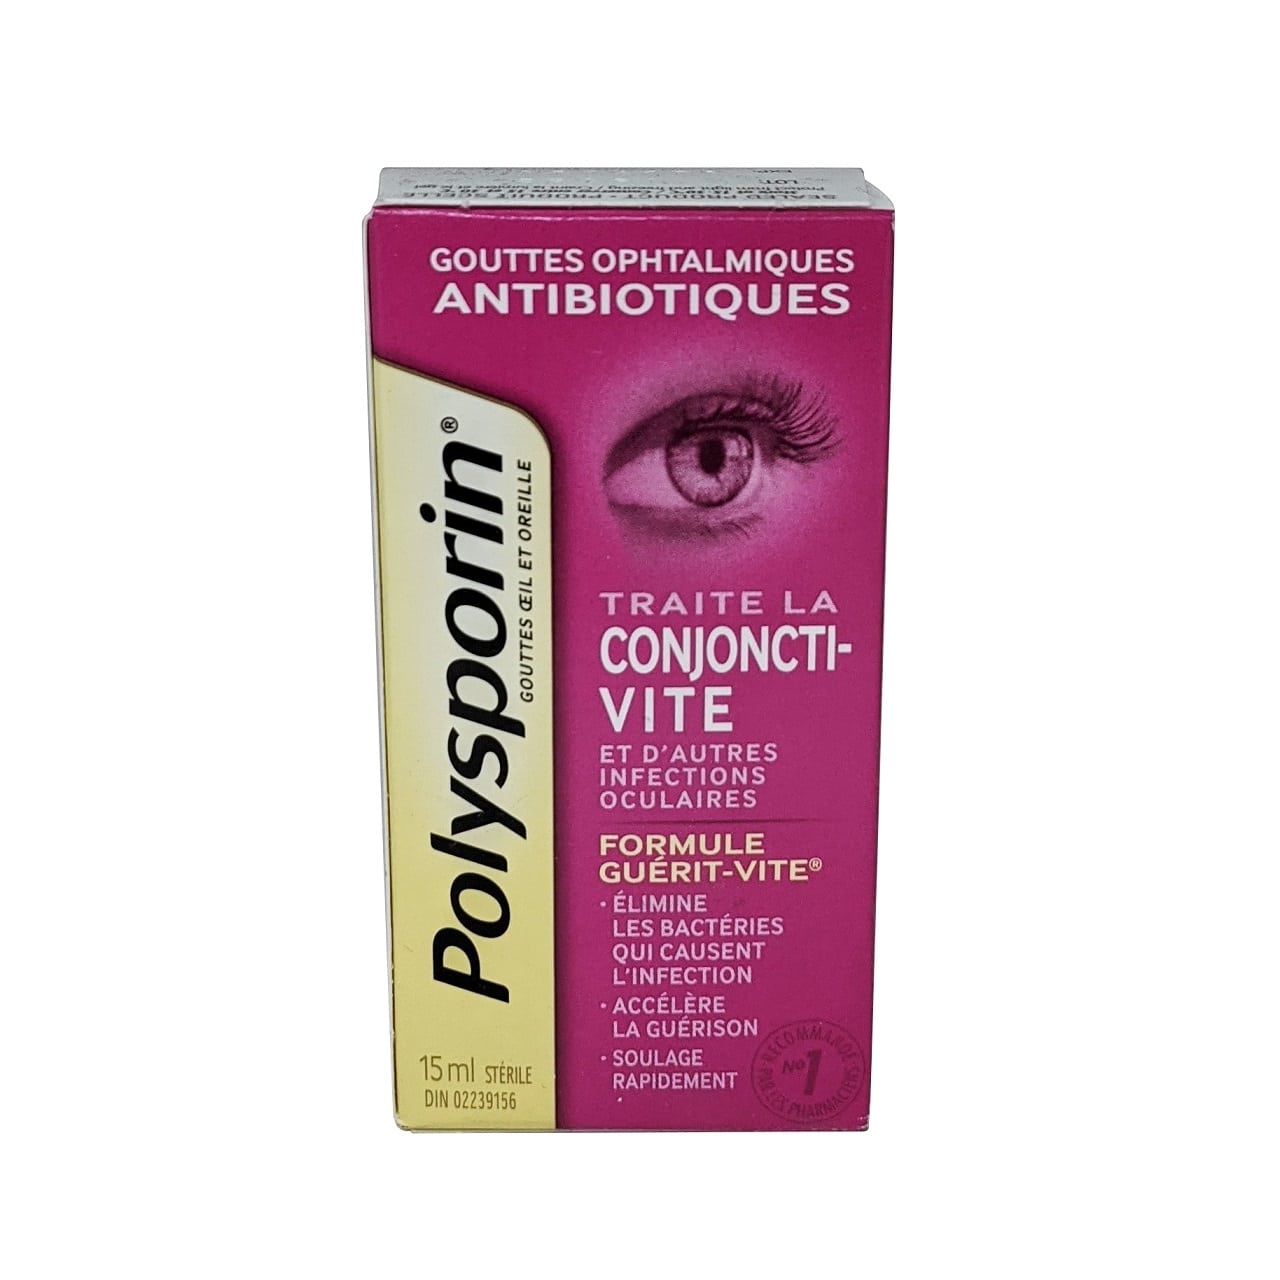 Product label for Polysporin Antibiotic Eye Drops (15 mL) in French